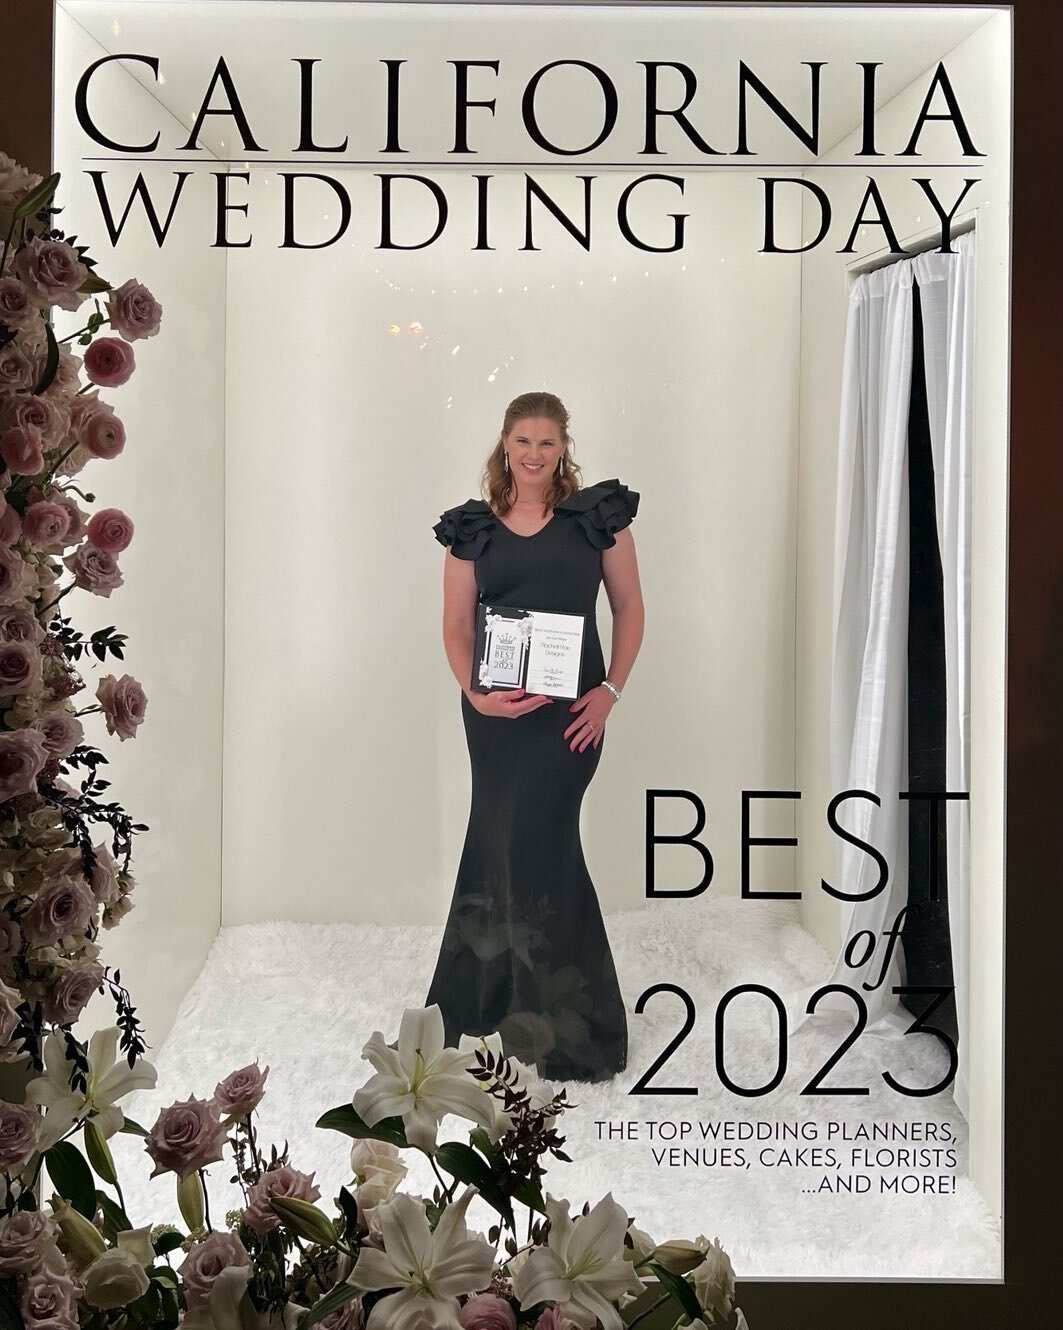 I am absolutely thrilled and deeply honored to share some incredible news with you all. I have been awarded the prestigious @californiaweddingday Best of 2023 award for the Best Invitation Designer in SLO County, and to top it off, this is the second